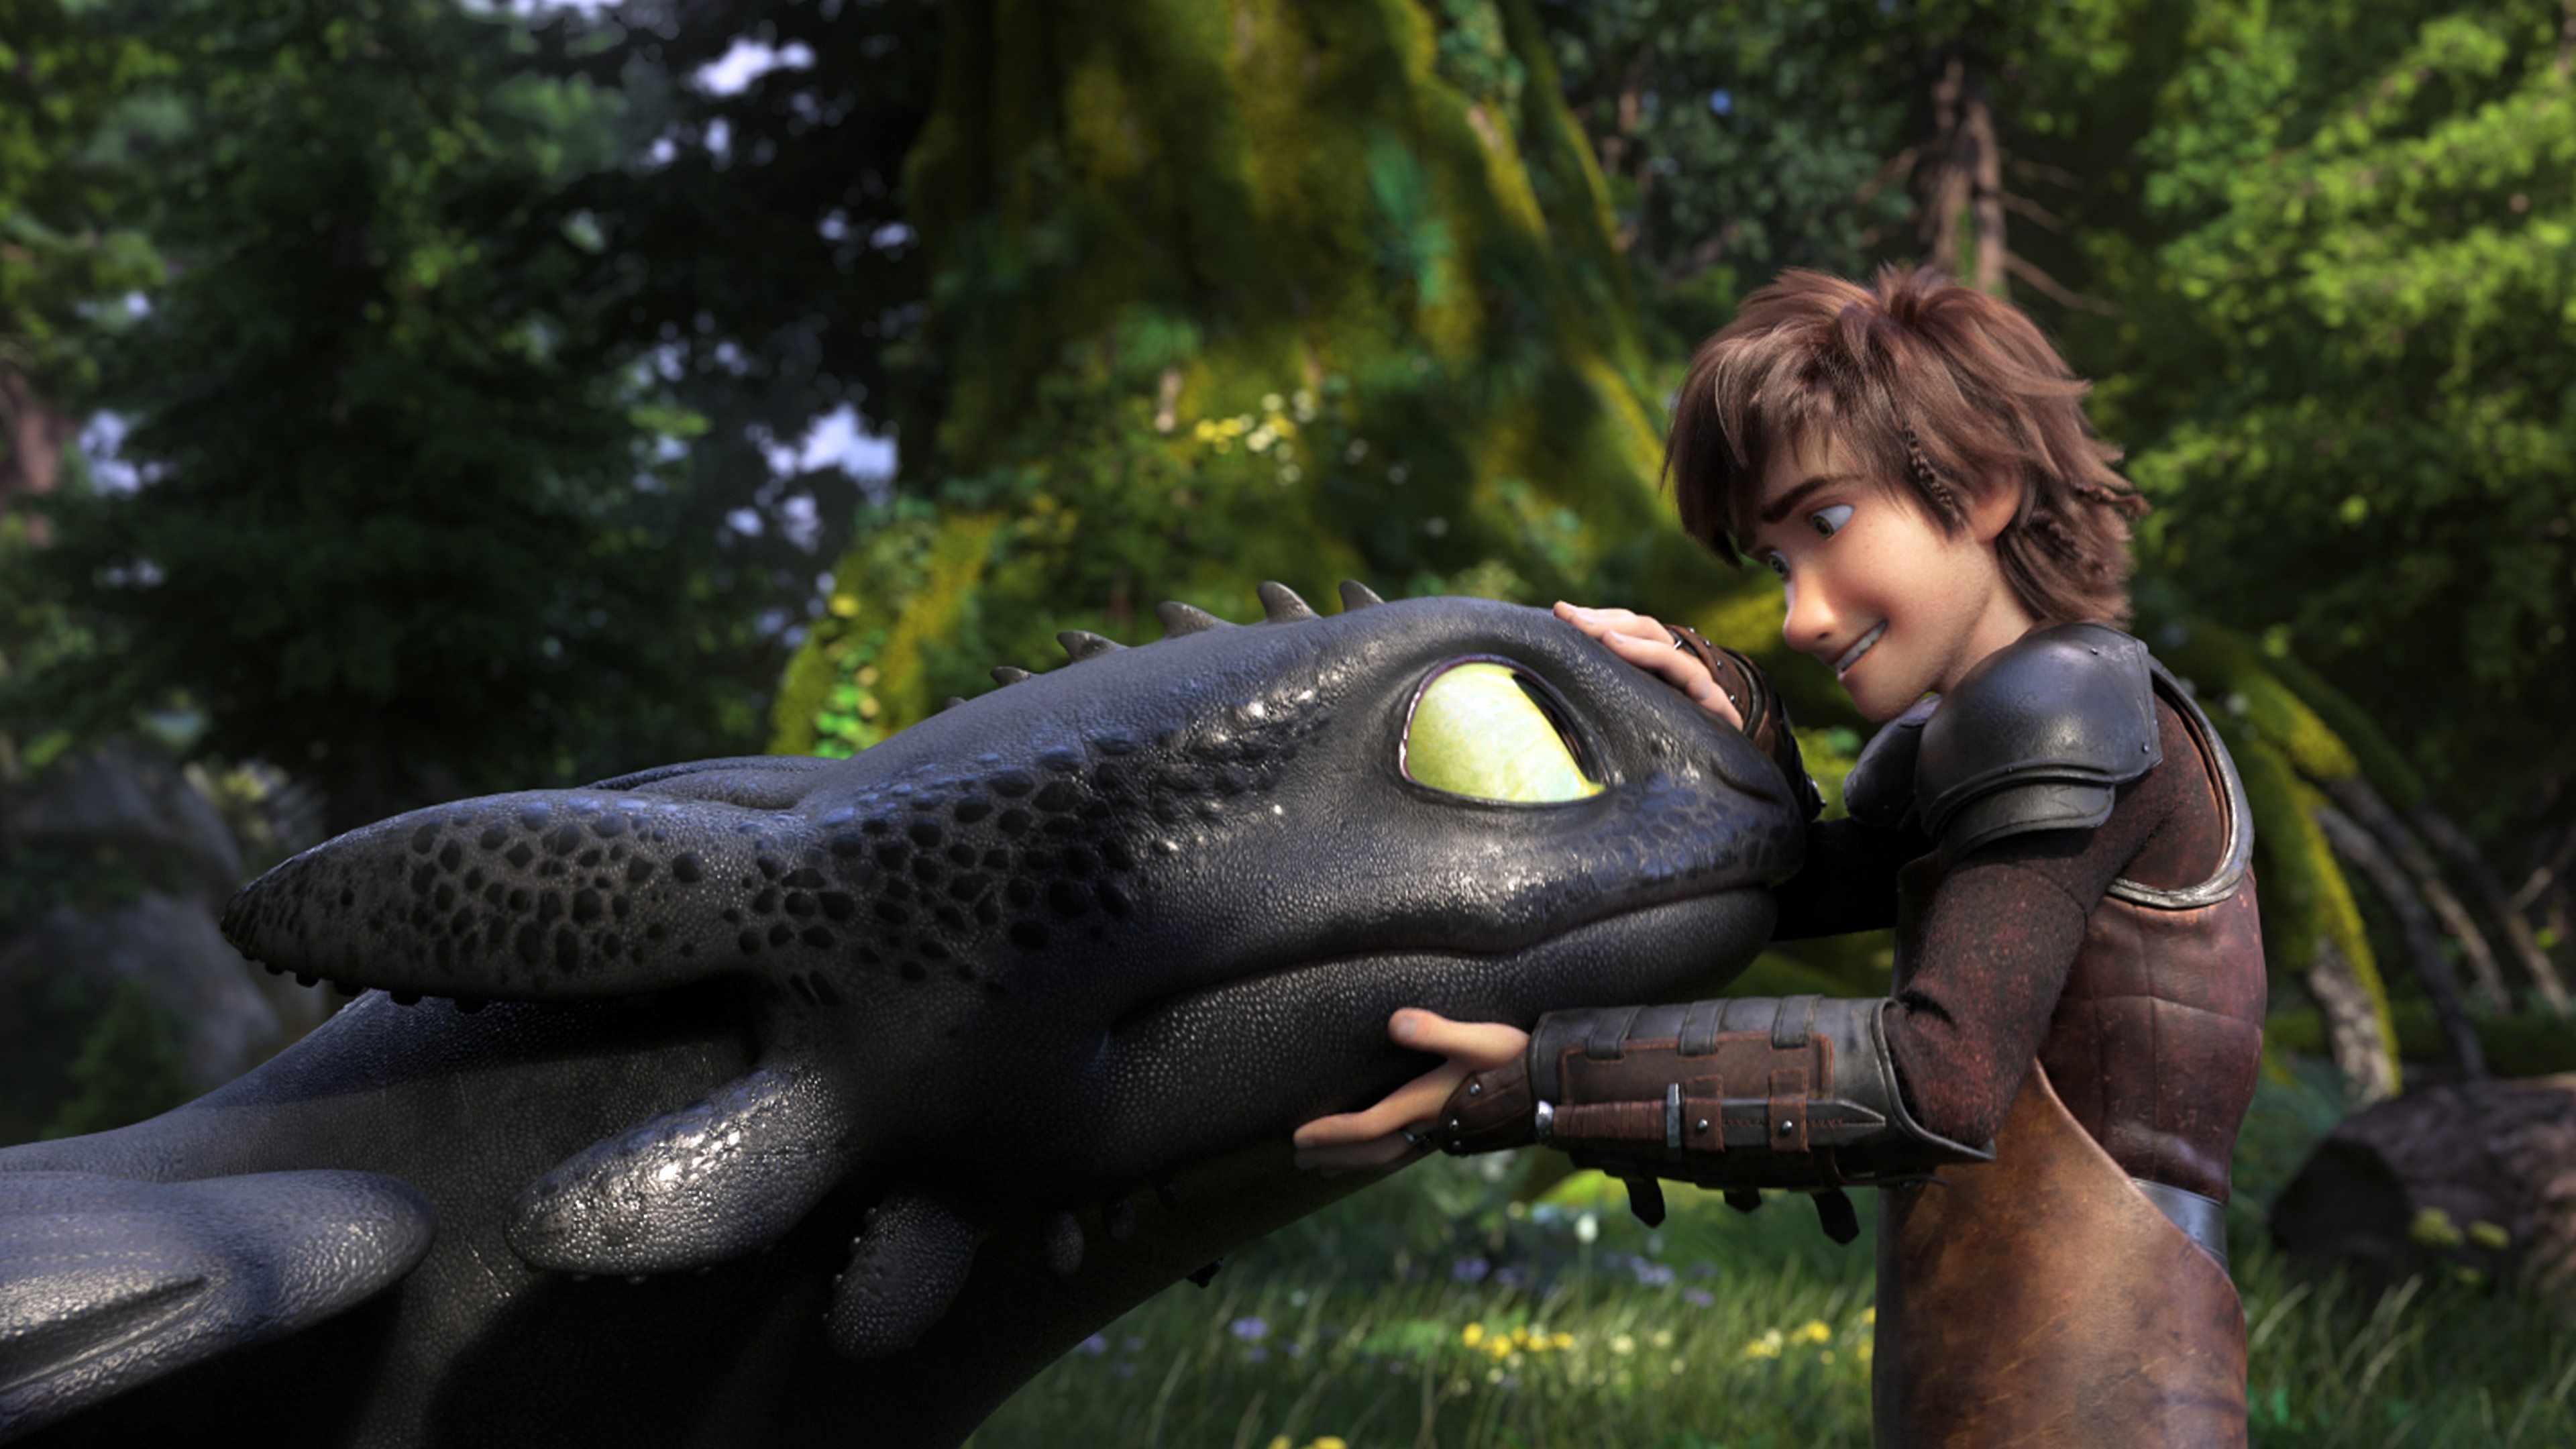 hiccup how to train your dragon 3 2019 1537644200 - Hiccup How To Train Your Dragon 3 2019 - movies wallpapers, how to train your dragon wallpapers, how to train your dragon the hidden world wallpapers, how to train your dragon 3 wallpapers, hd-wallpapers, animated movies wallpapers, 4k-wallpapers, 2019 movies wallpapers